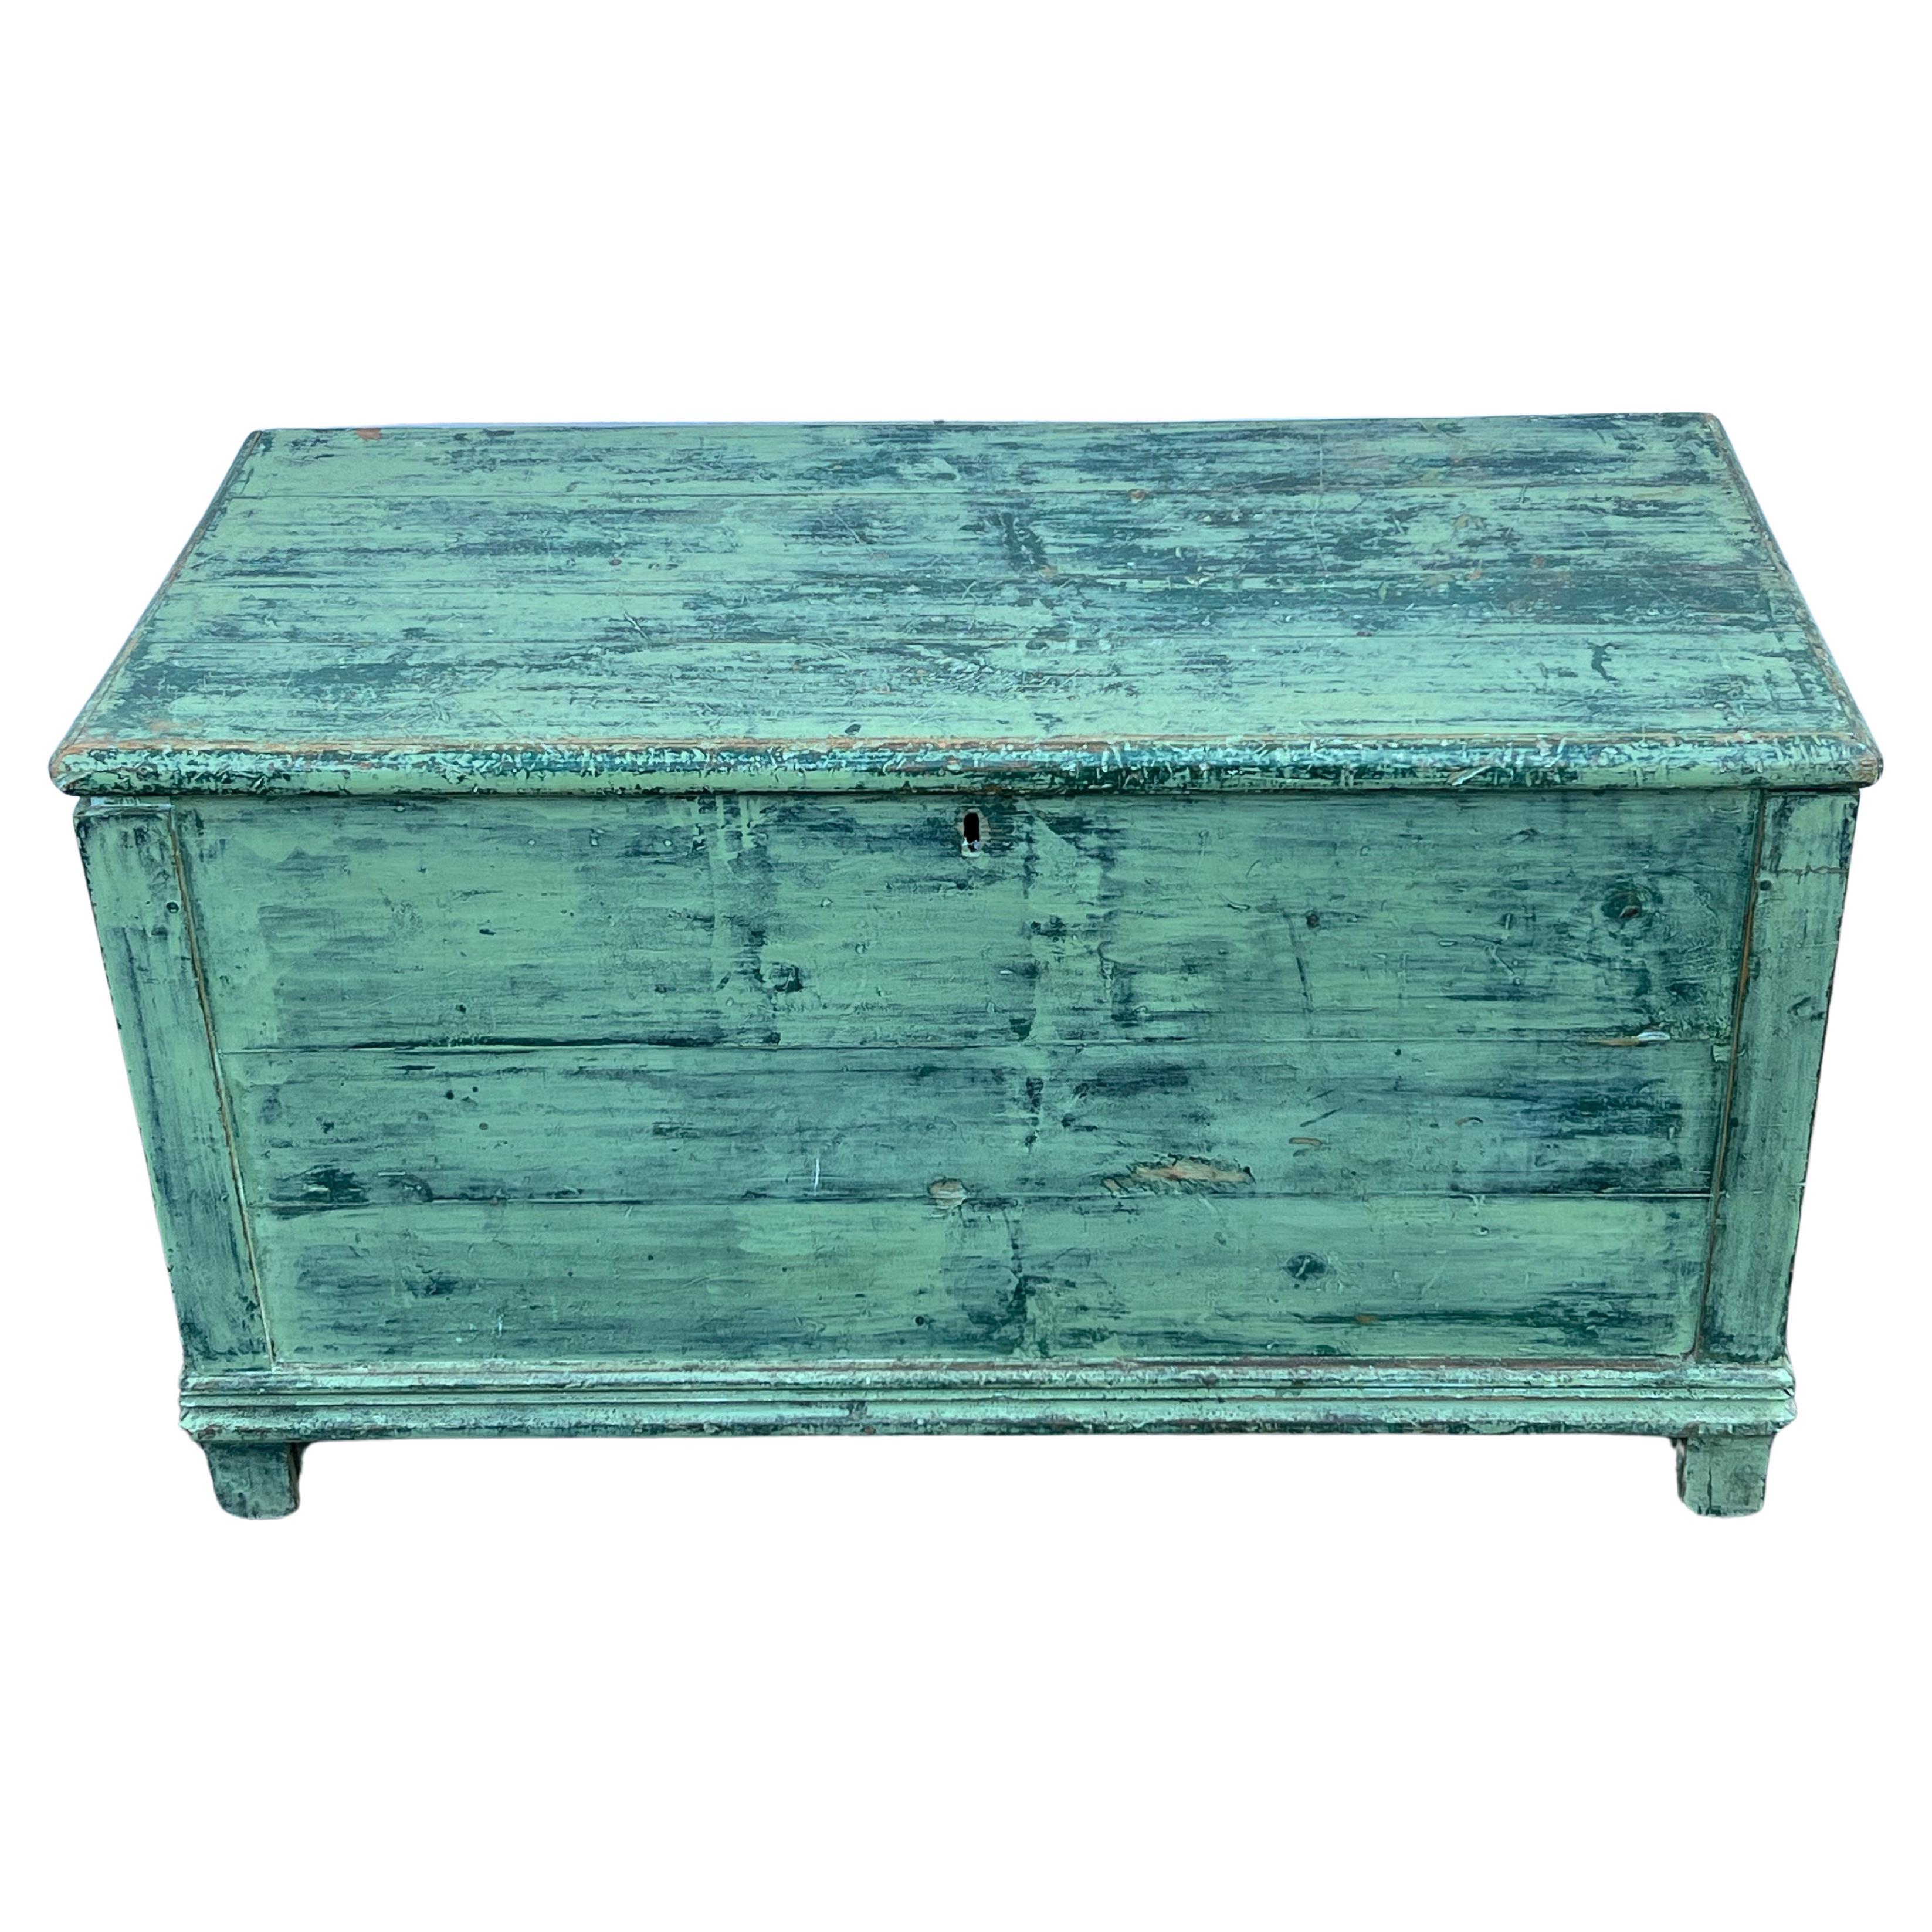 19th Century Pine Blanket Chest in Early Green Paint